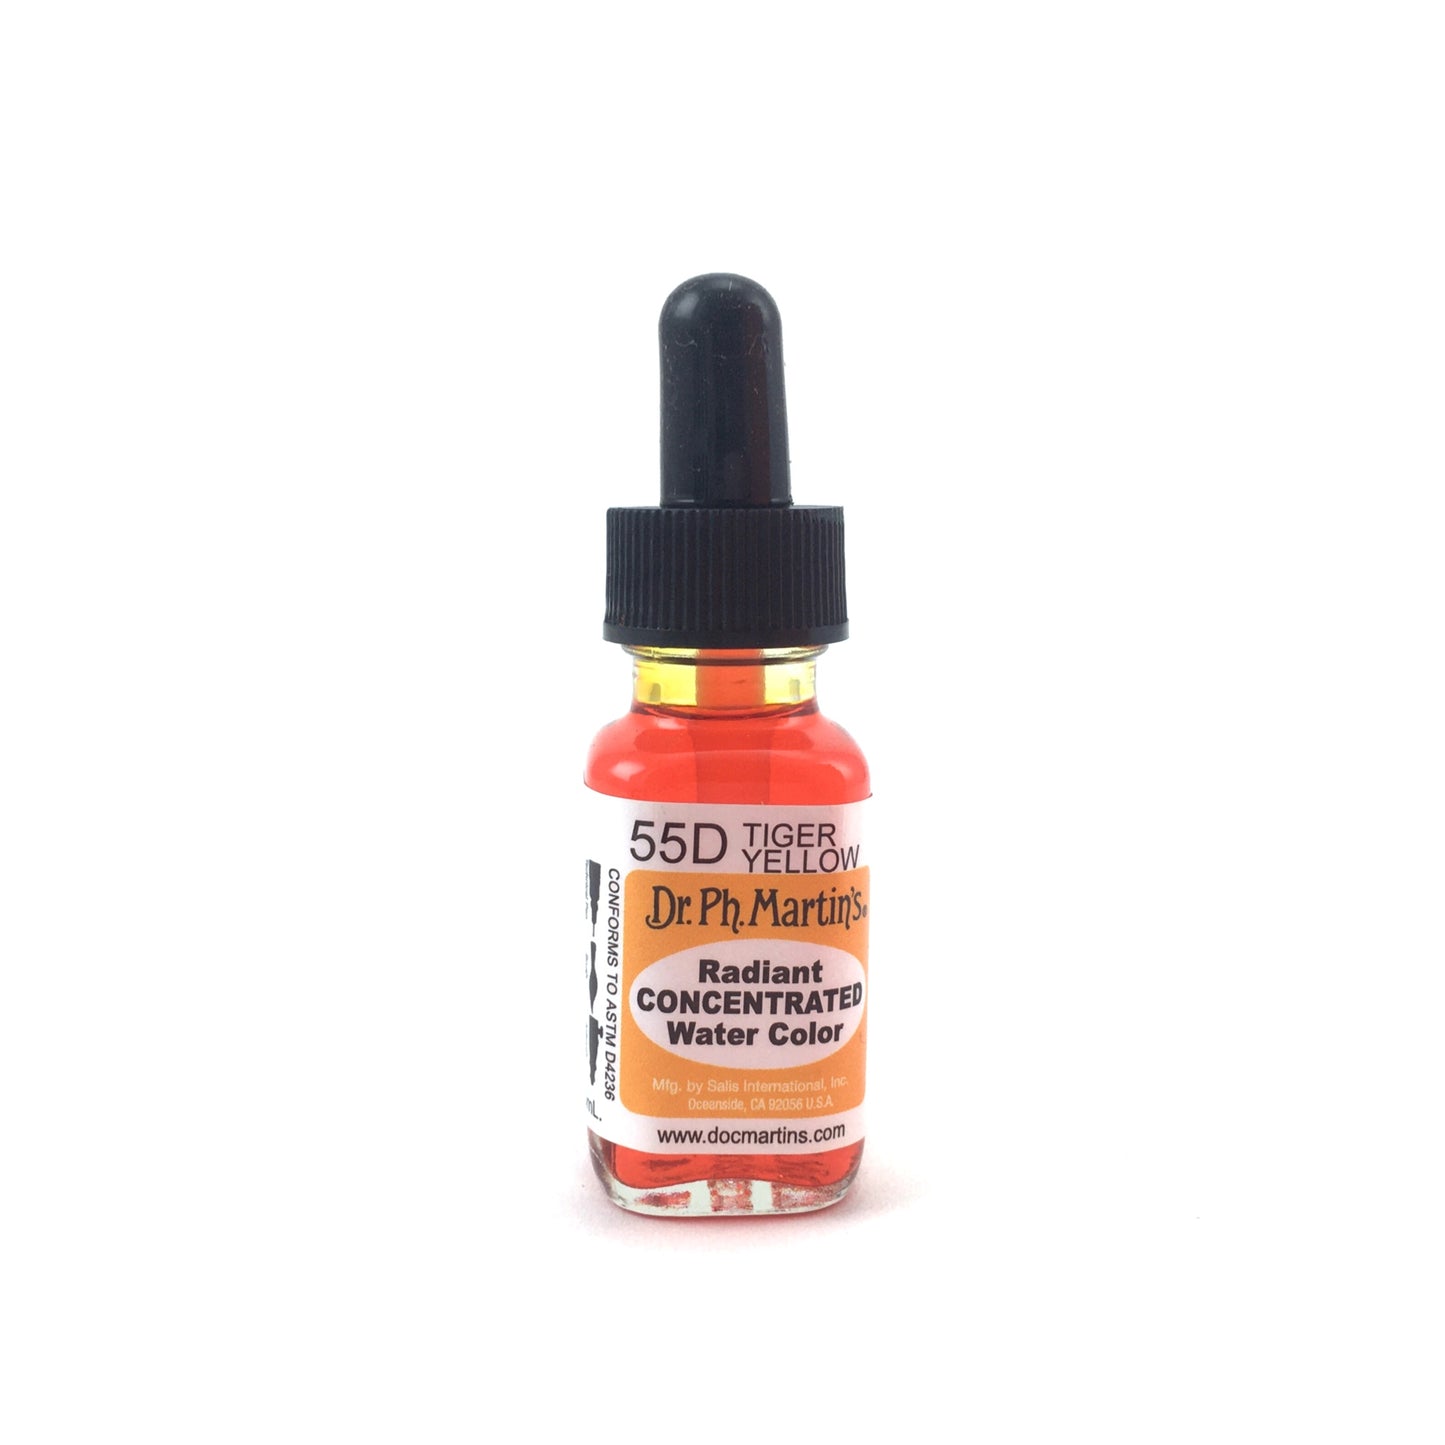 Dr. Ph. Martin's Radiant Concentrated Watercolor - .50 oz. - 55D - Tiger Yellow by Dr. Ph. Martin’s - K. A. Artist Shop